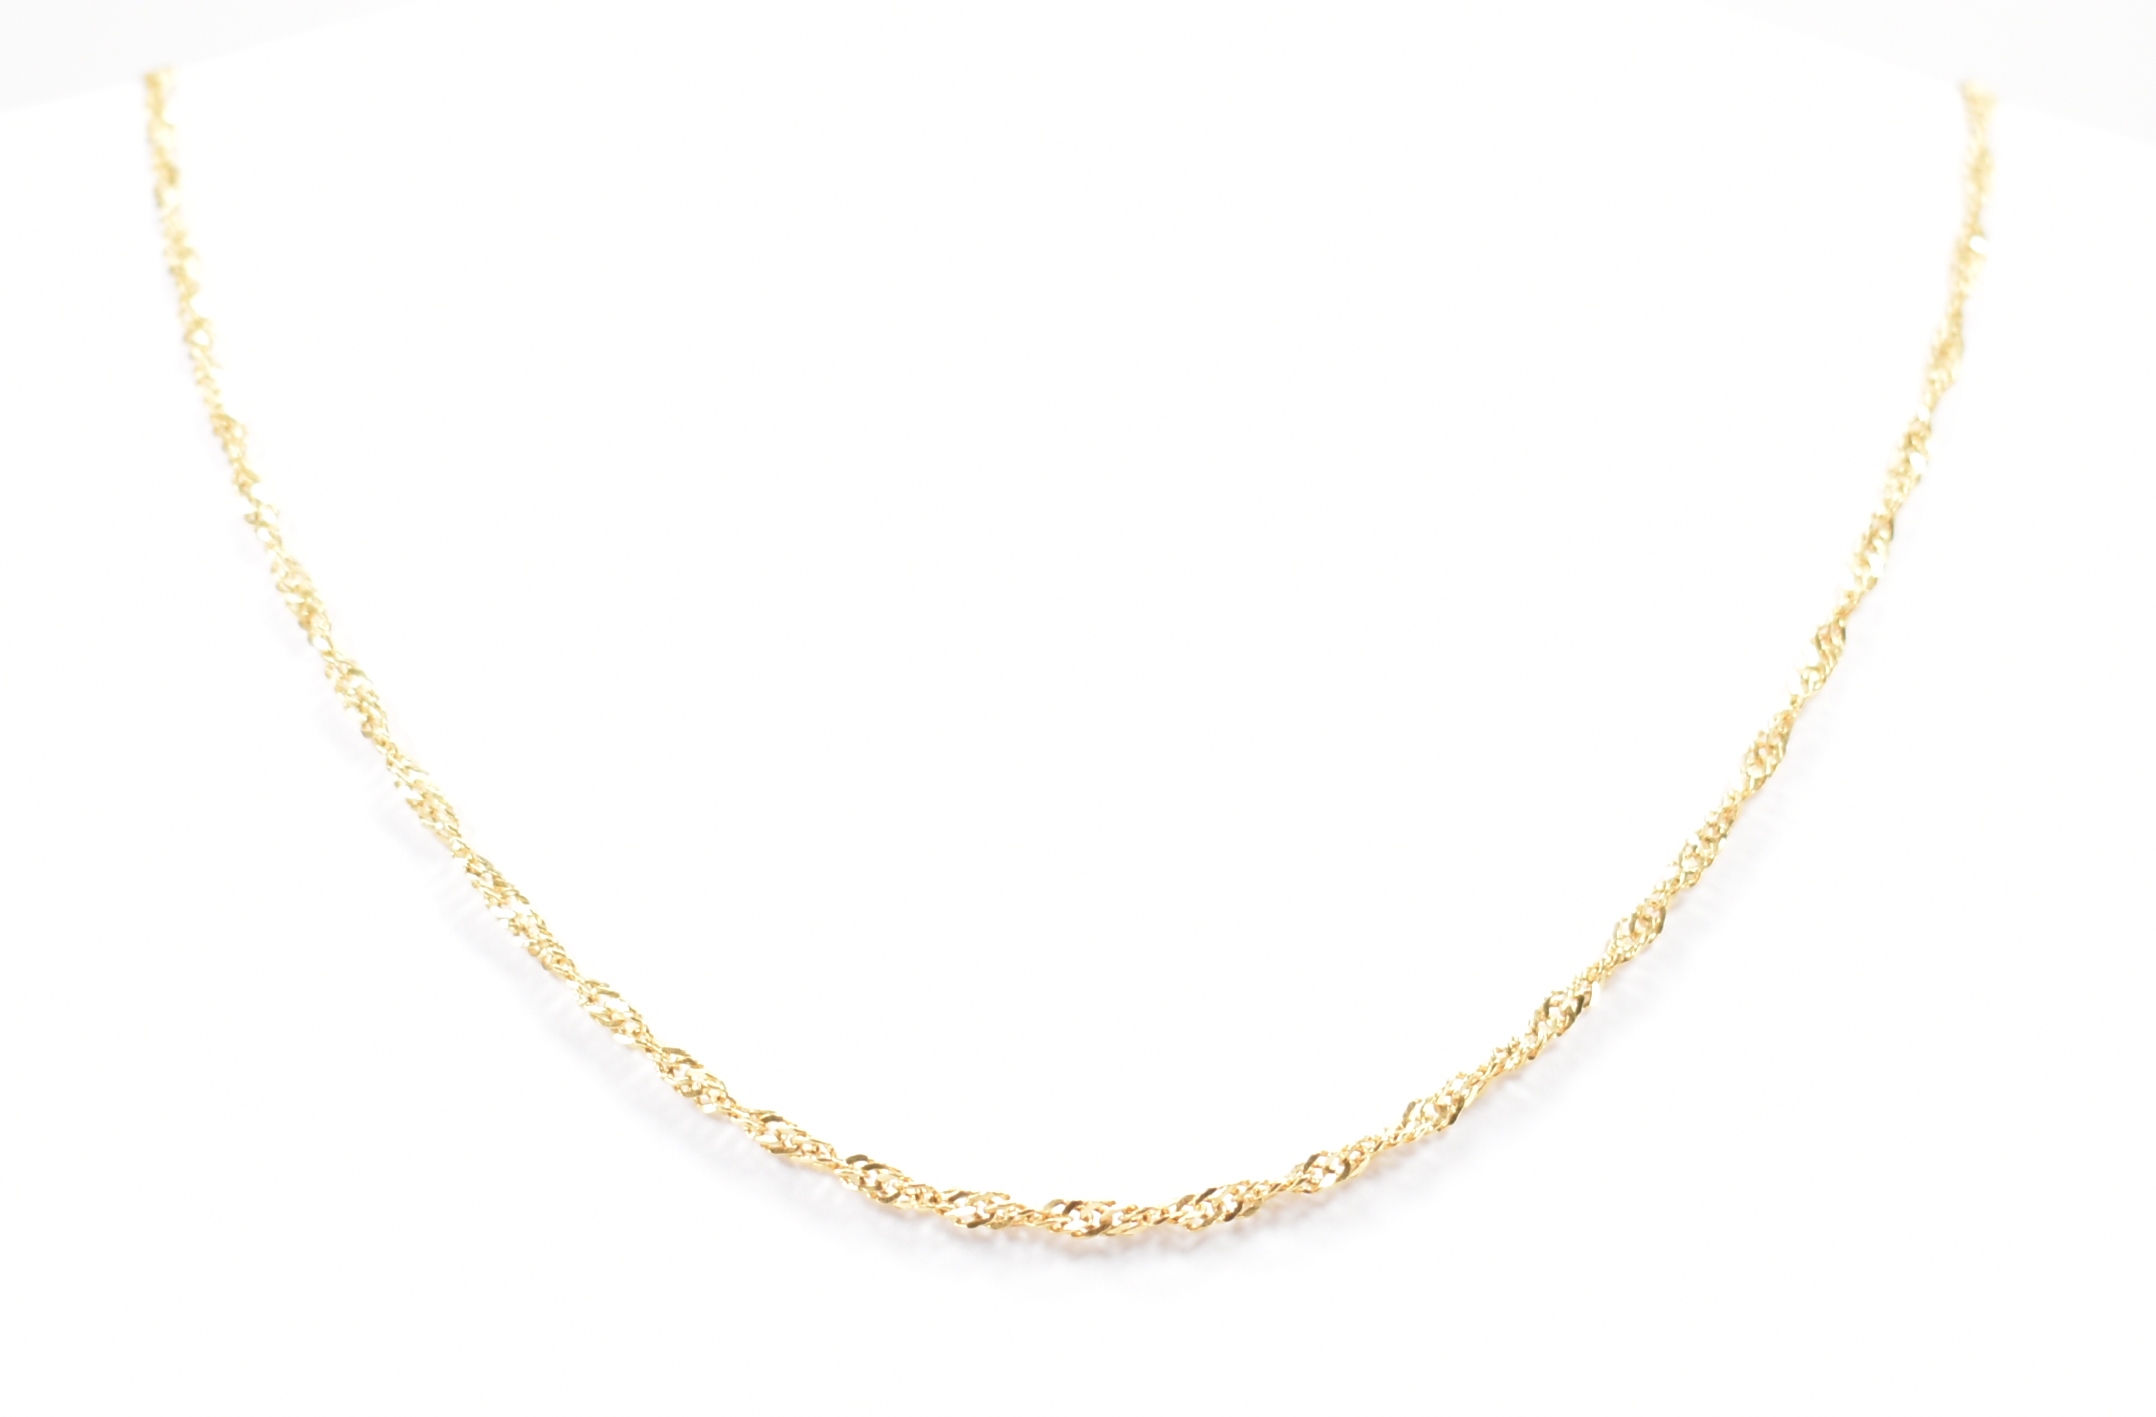 GOLD ROPE TWIST NECKLACE CHAIN - Image 2 of 4